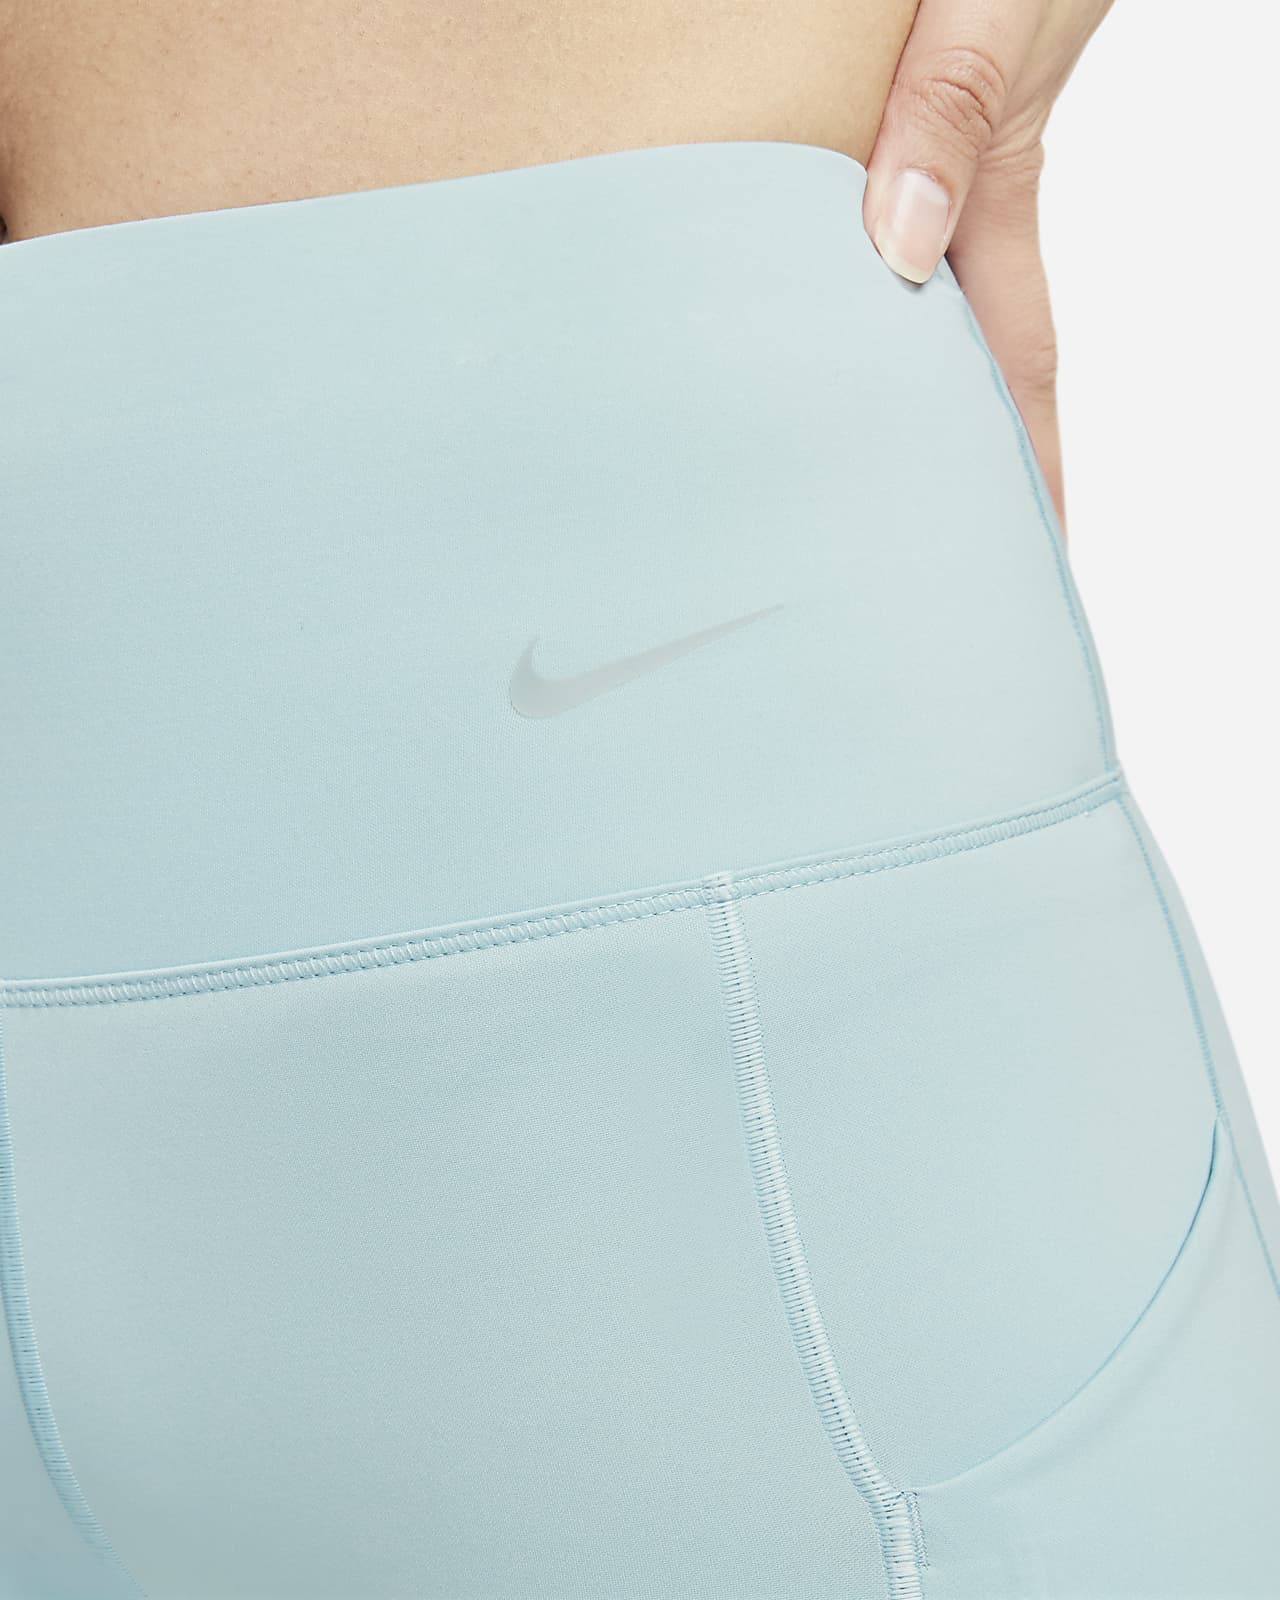 Nike Go Women's Firm-Support High-Waisted Full-Length Leggings with Pockets  (Plus Size). Nike SK